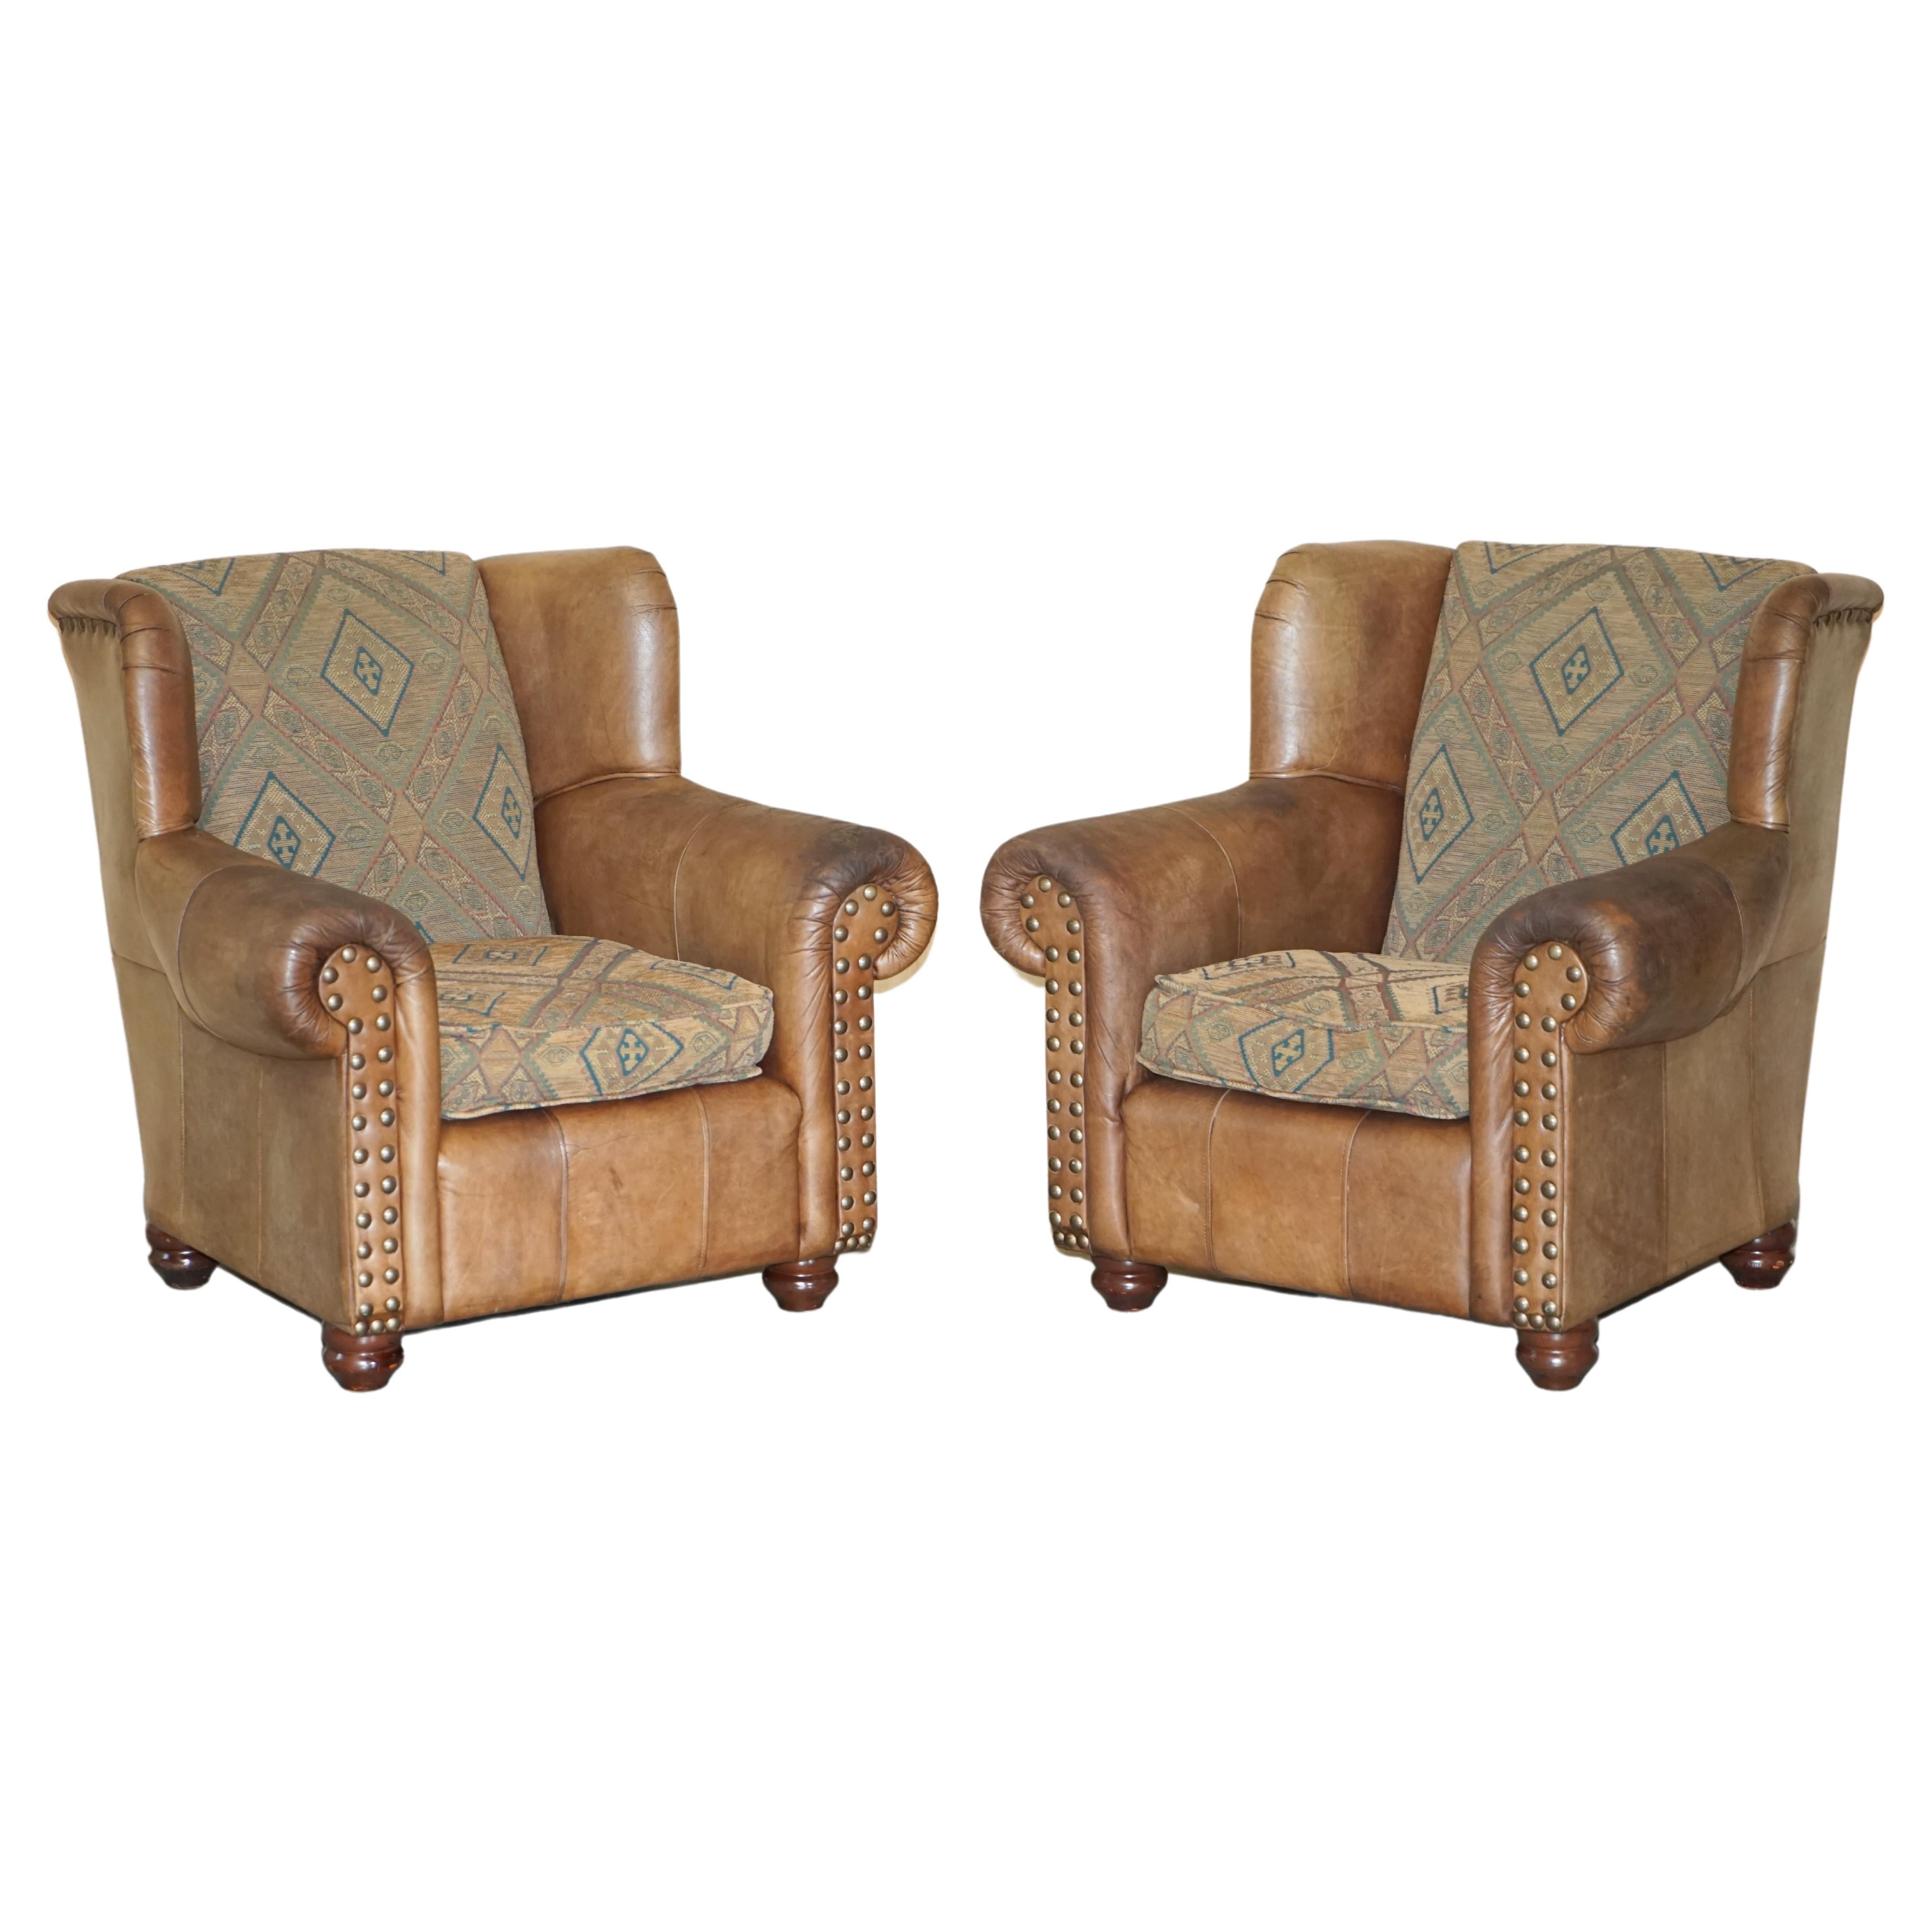 PAIR OF ViNTAGE THOMAS LLOYD BROWN LEATHER KILIM ARMCHAIRS FROM SCOTTISH CASTLe